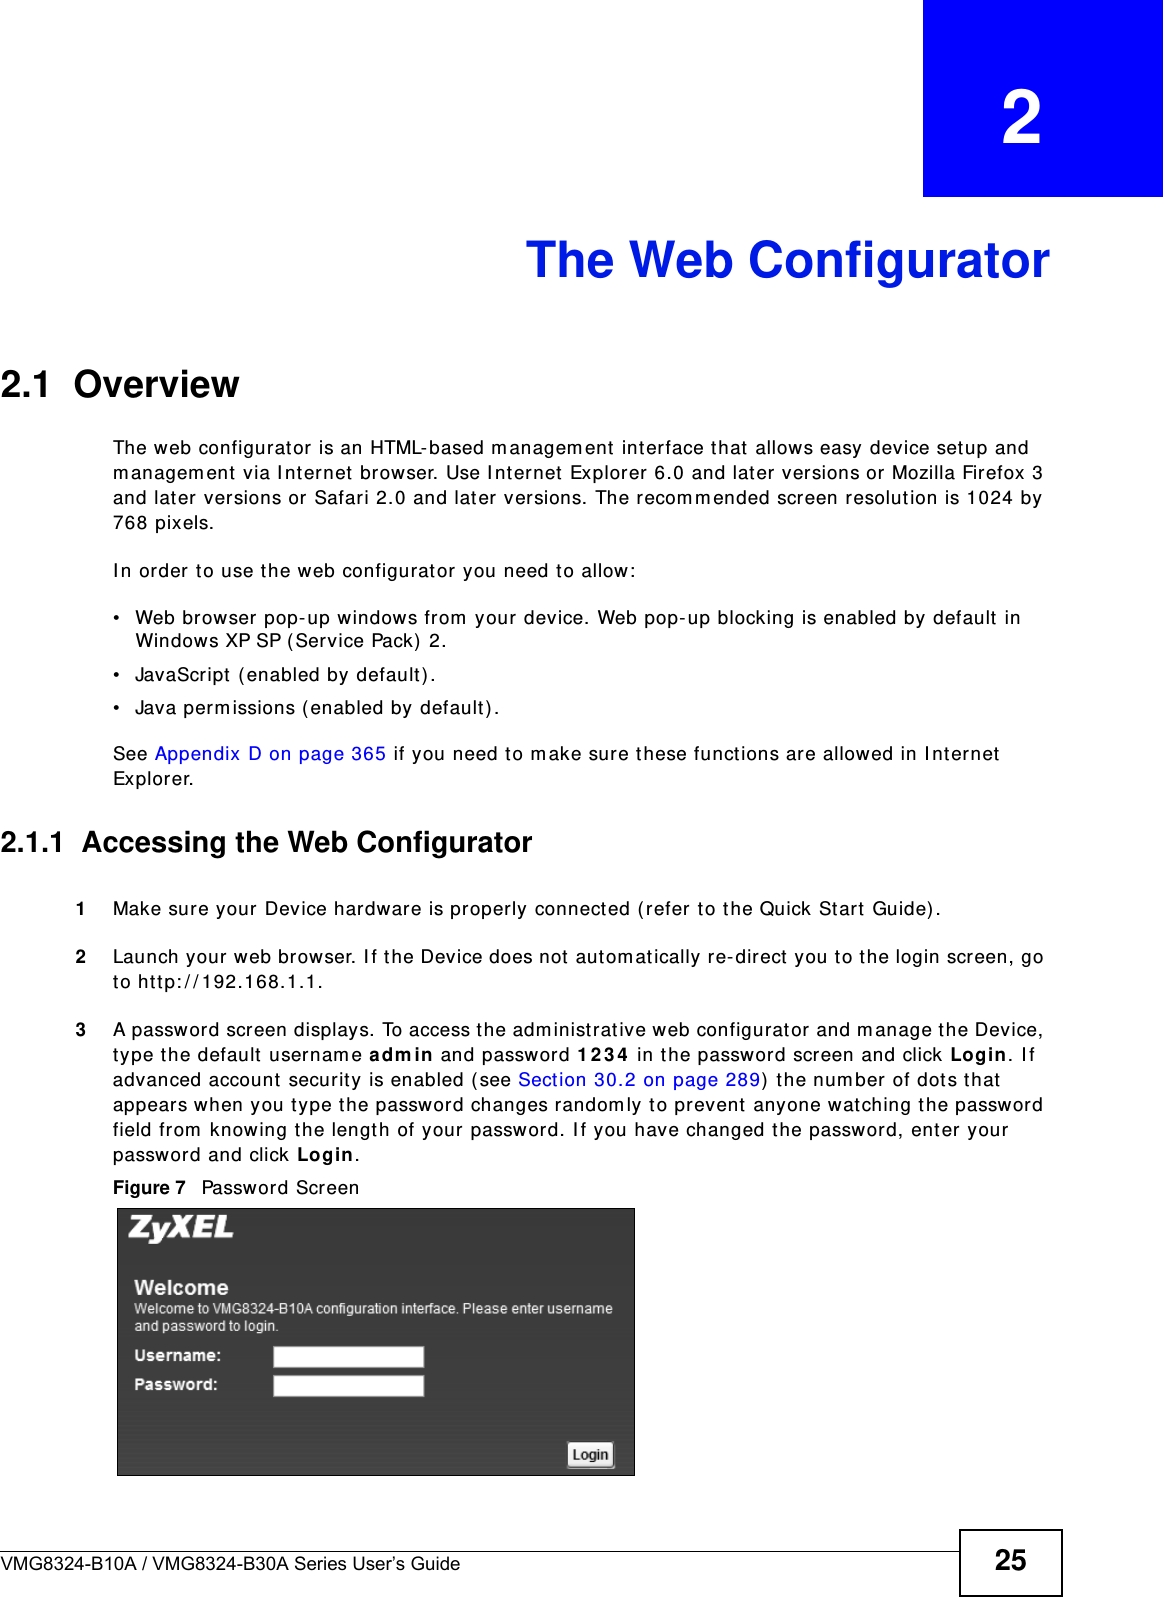 VMG8324-B10A / VMG8324-B30A Series User’s Guide 25CHAPTER   2The Web Configurator2.1  OverviewThe w eb configurat or  is an HTML-based m anagem ent int erface that allows easy device set up and m anagem ent via I nternet brow ser. Use I nternet Explorer 6.0 and lat er versions or Mozilla Firefox 3 and lat er versions or Safari 2.0 and lat er versions. The recom m ended screen resolut ion is 1024 by 768 pixels.I n order t o use the web configurat or you need to allow :• Web browser pop- up windows from  your device. Web pop- up blocking is enabled by default in Windows XP SP ( Service Pack)  2.• JavaScript  ( enabled by default ) .• Java perm issions ( enabled by default) .See Appendix D on page 365 if you need t o m ake sure these functions ar e allowed in I nt ernet  Explorer. 2.1.1  Accessing the Web Configurator1Make sure your Device hardware is properly connected ( refer t o t he Quick St art  Guide) .2Launch your web browser. I f t he Device does not  aut om at ically re- direct  you to the login screen, go to ht t p: / / 192.168.1.1.3A password screen displays. To access the adm inist rat ive web configurat or and m anage t he Device, type t he default  usernam e adm in and password 1 2 3 4  in t he passw ord screen and click Login . I f advanced account  security is enabled ( see Section 30.2 on page 289)  t he num ber of dots that appears when you t ype the password changes random ly t o prevent  anyone watching the password field from  knowing t he length of your passw ord. I f you have changed the password, ent er your password and click Login. Figure 7   Passwor d Scr een